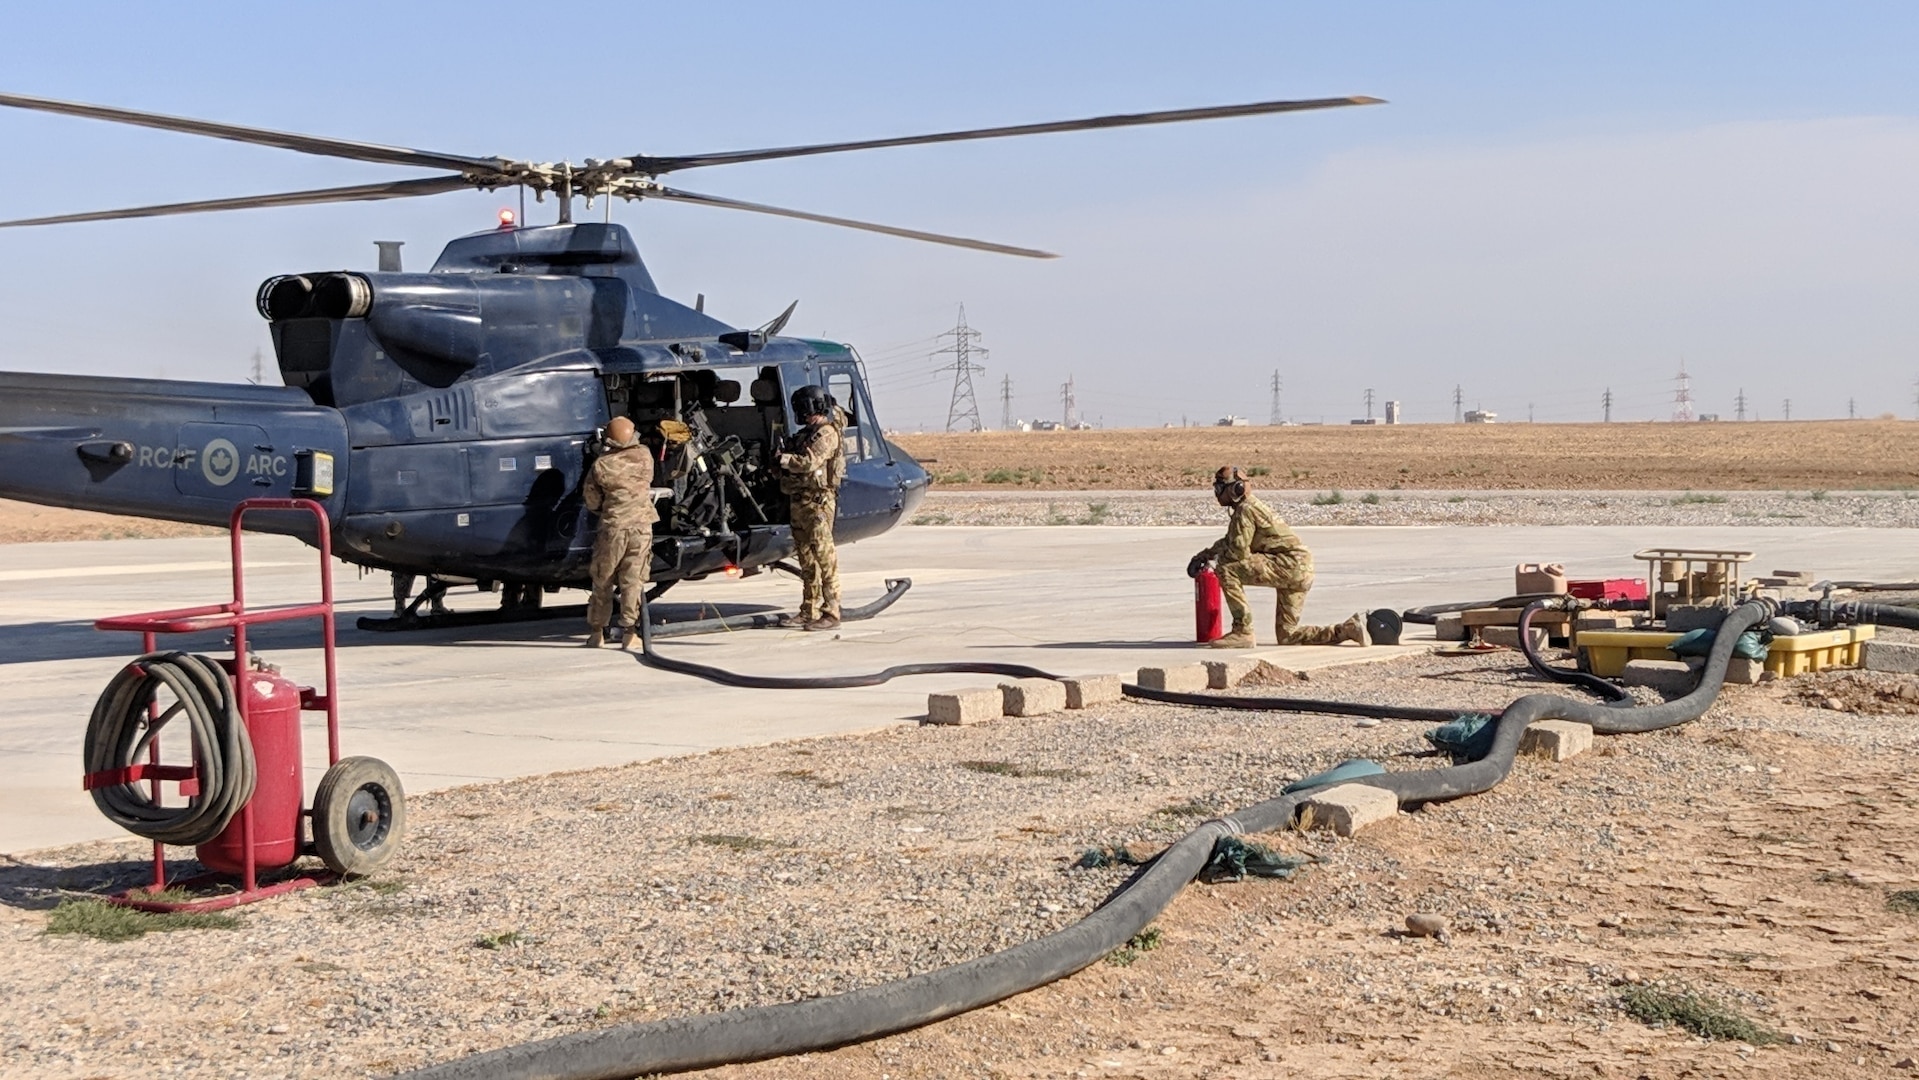 Spc. Clara Zurita, motor transport operator, and Spc. Godswill Orzabal, petroleum supply specialist, 574th Composite Supply Company, fuel up an NH90 helicopter at Erbil, Iraq, Oct. 15, 2019.